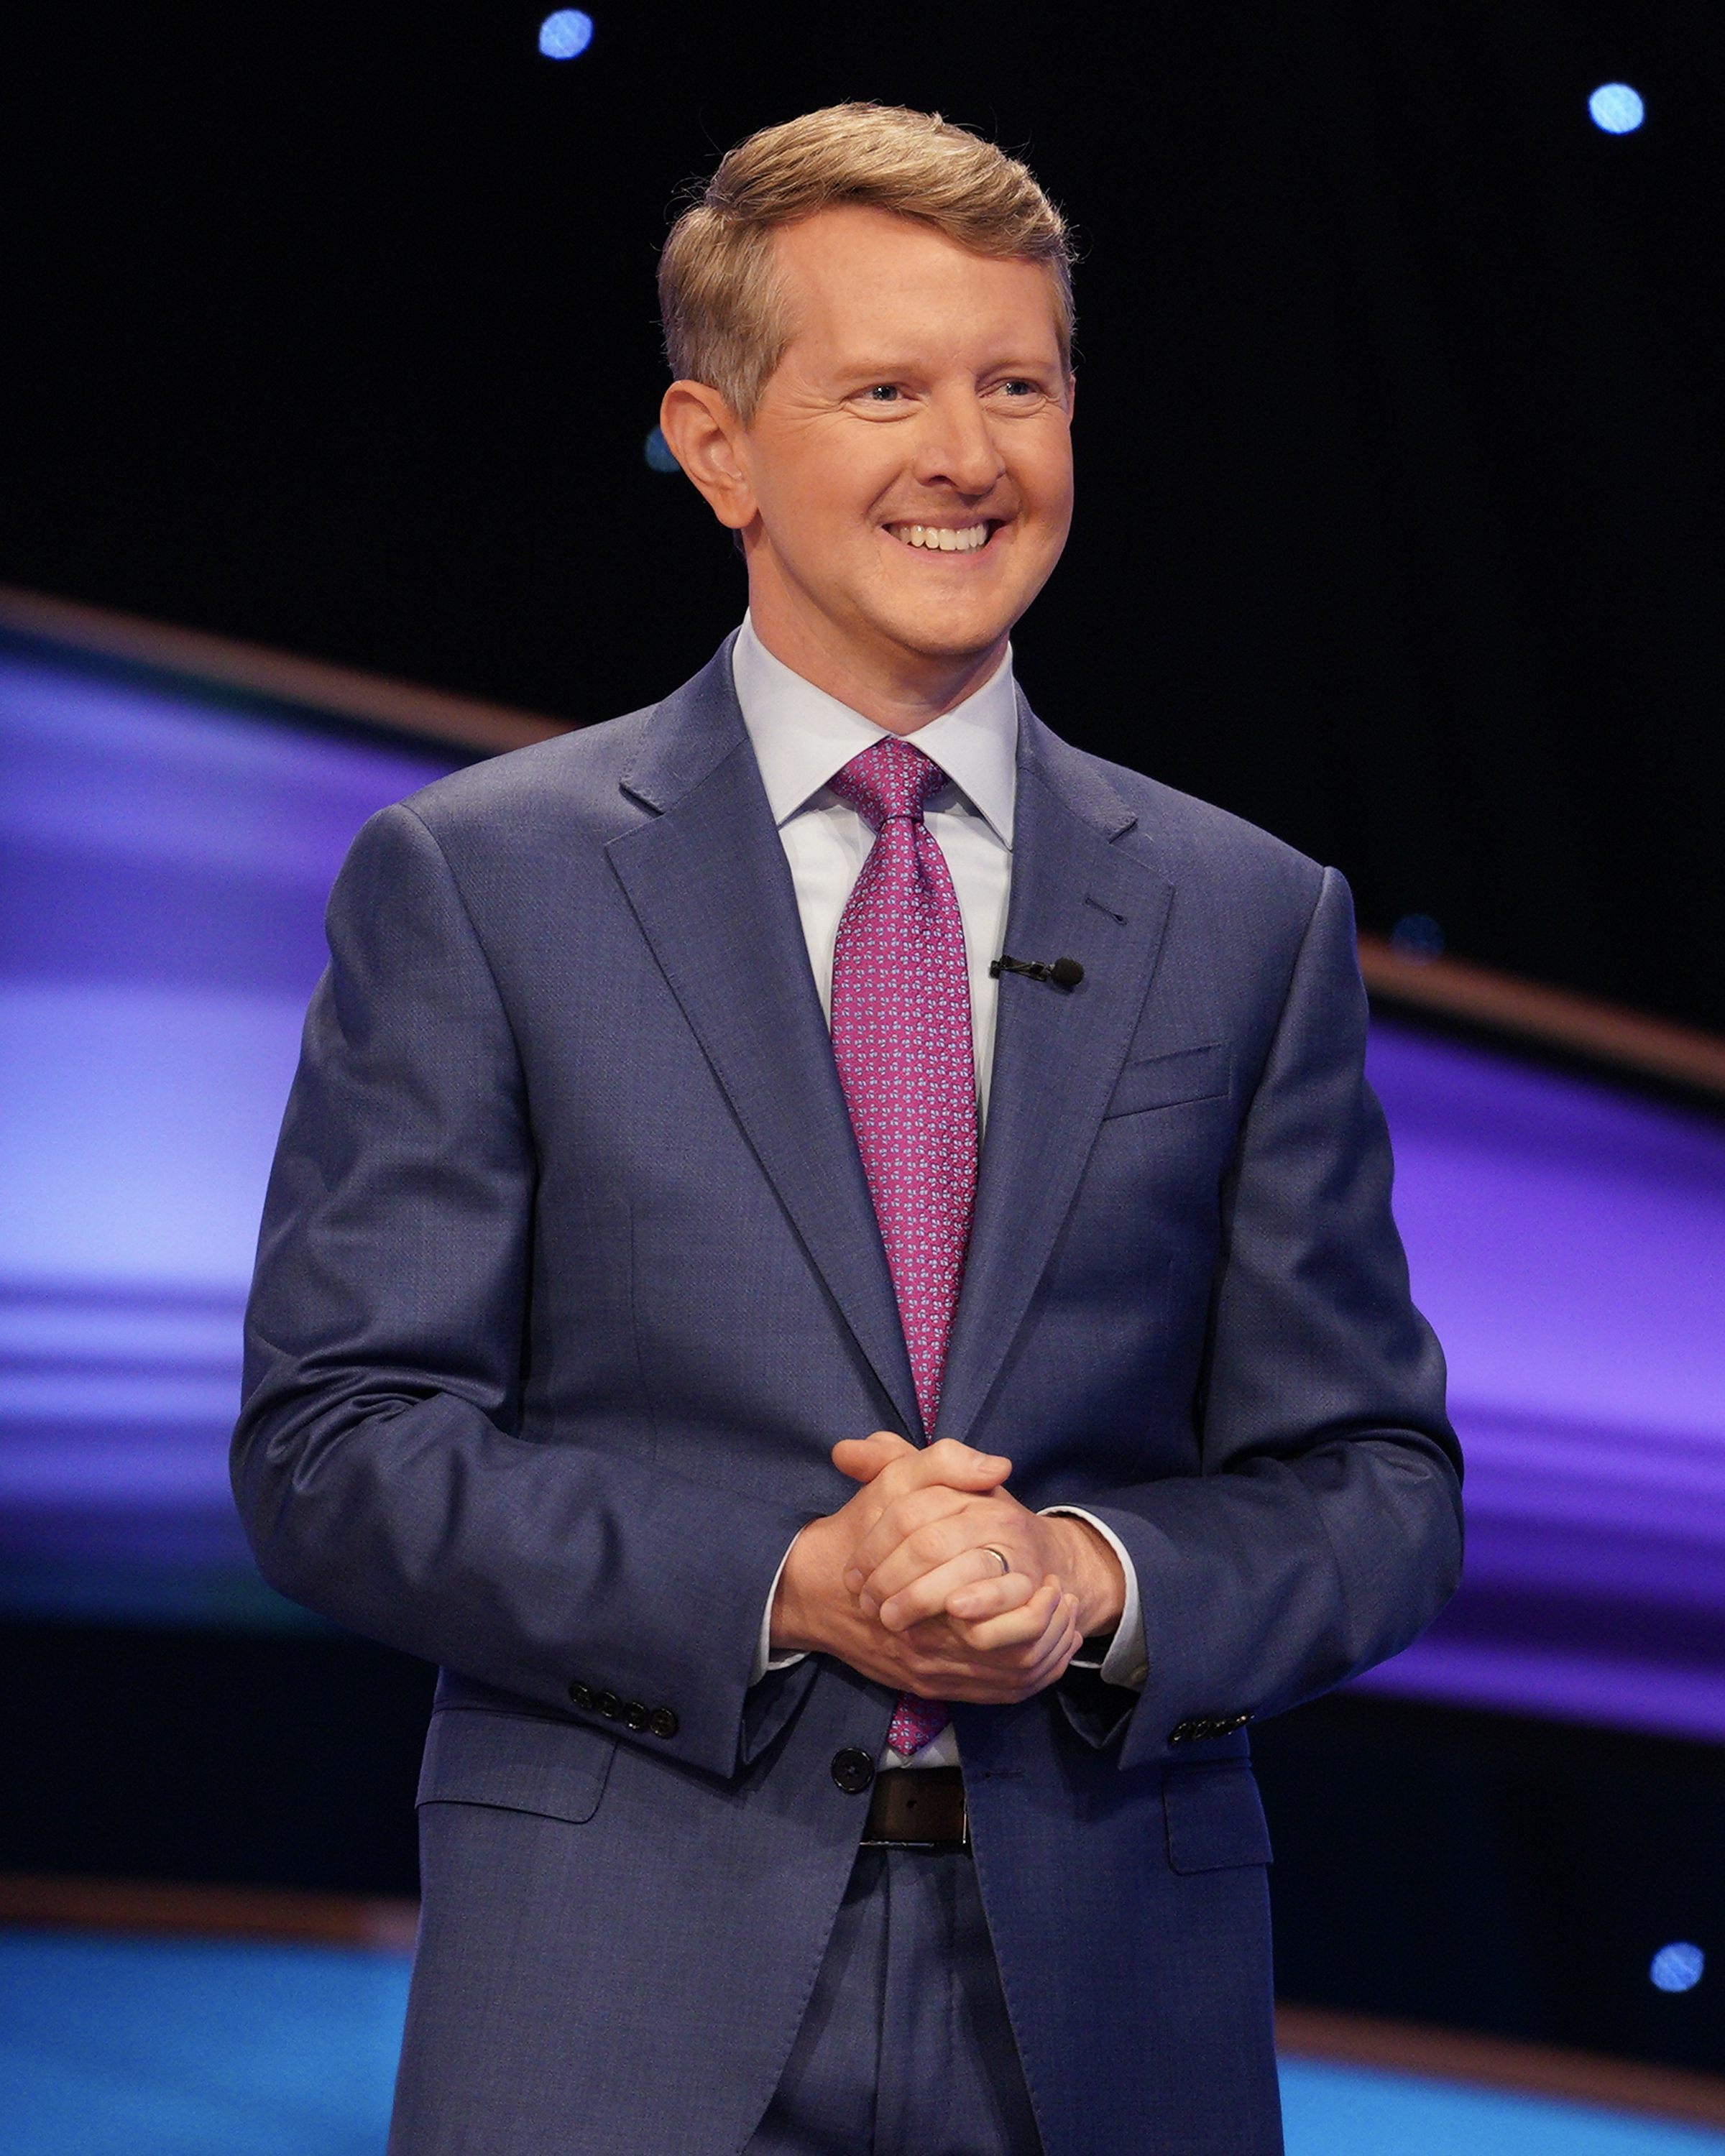 Ken Jennings is now the sole host of Jeopardy! and Mayim removed 'co-host' from her bio